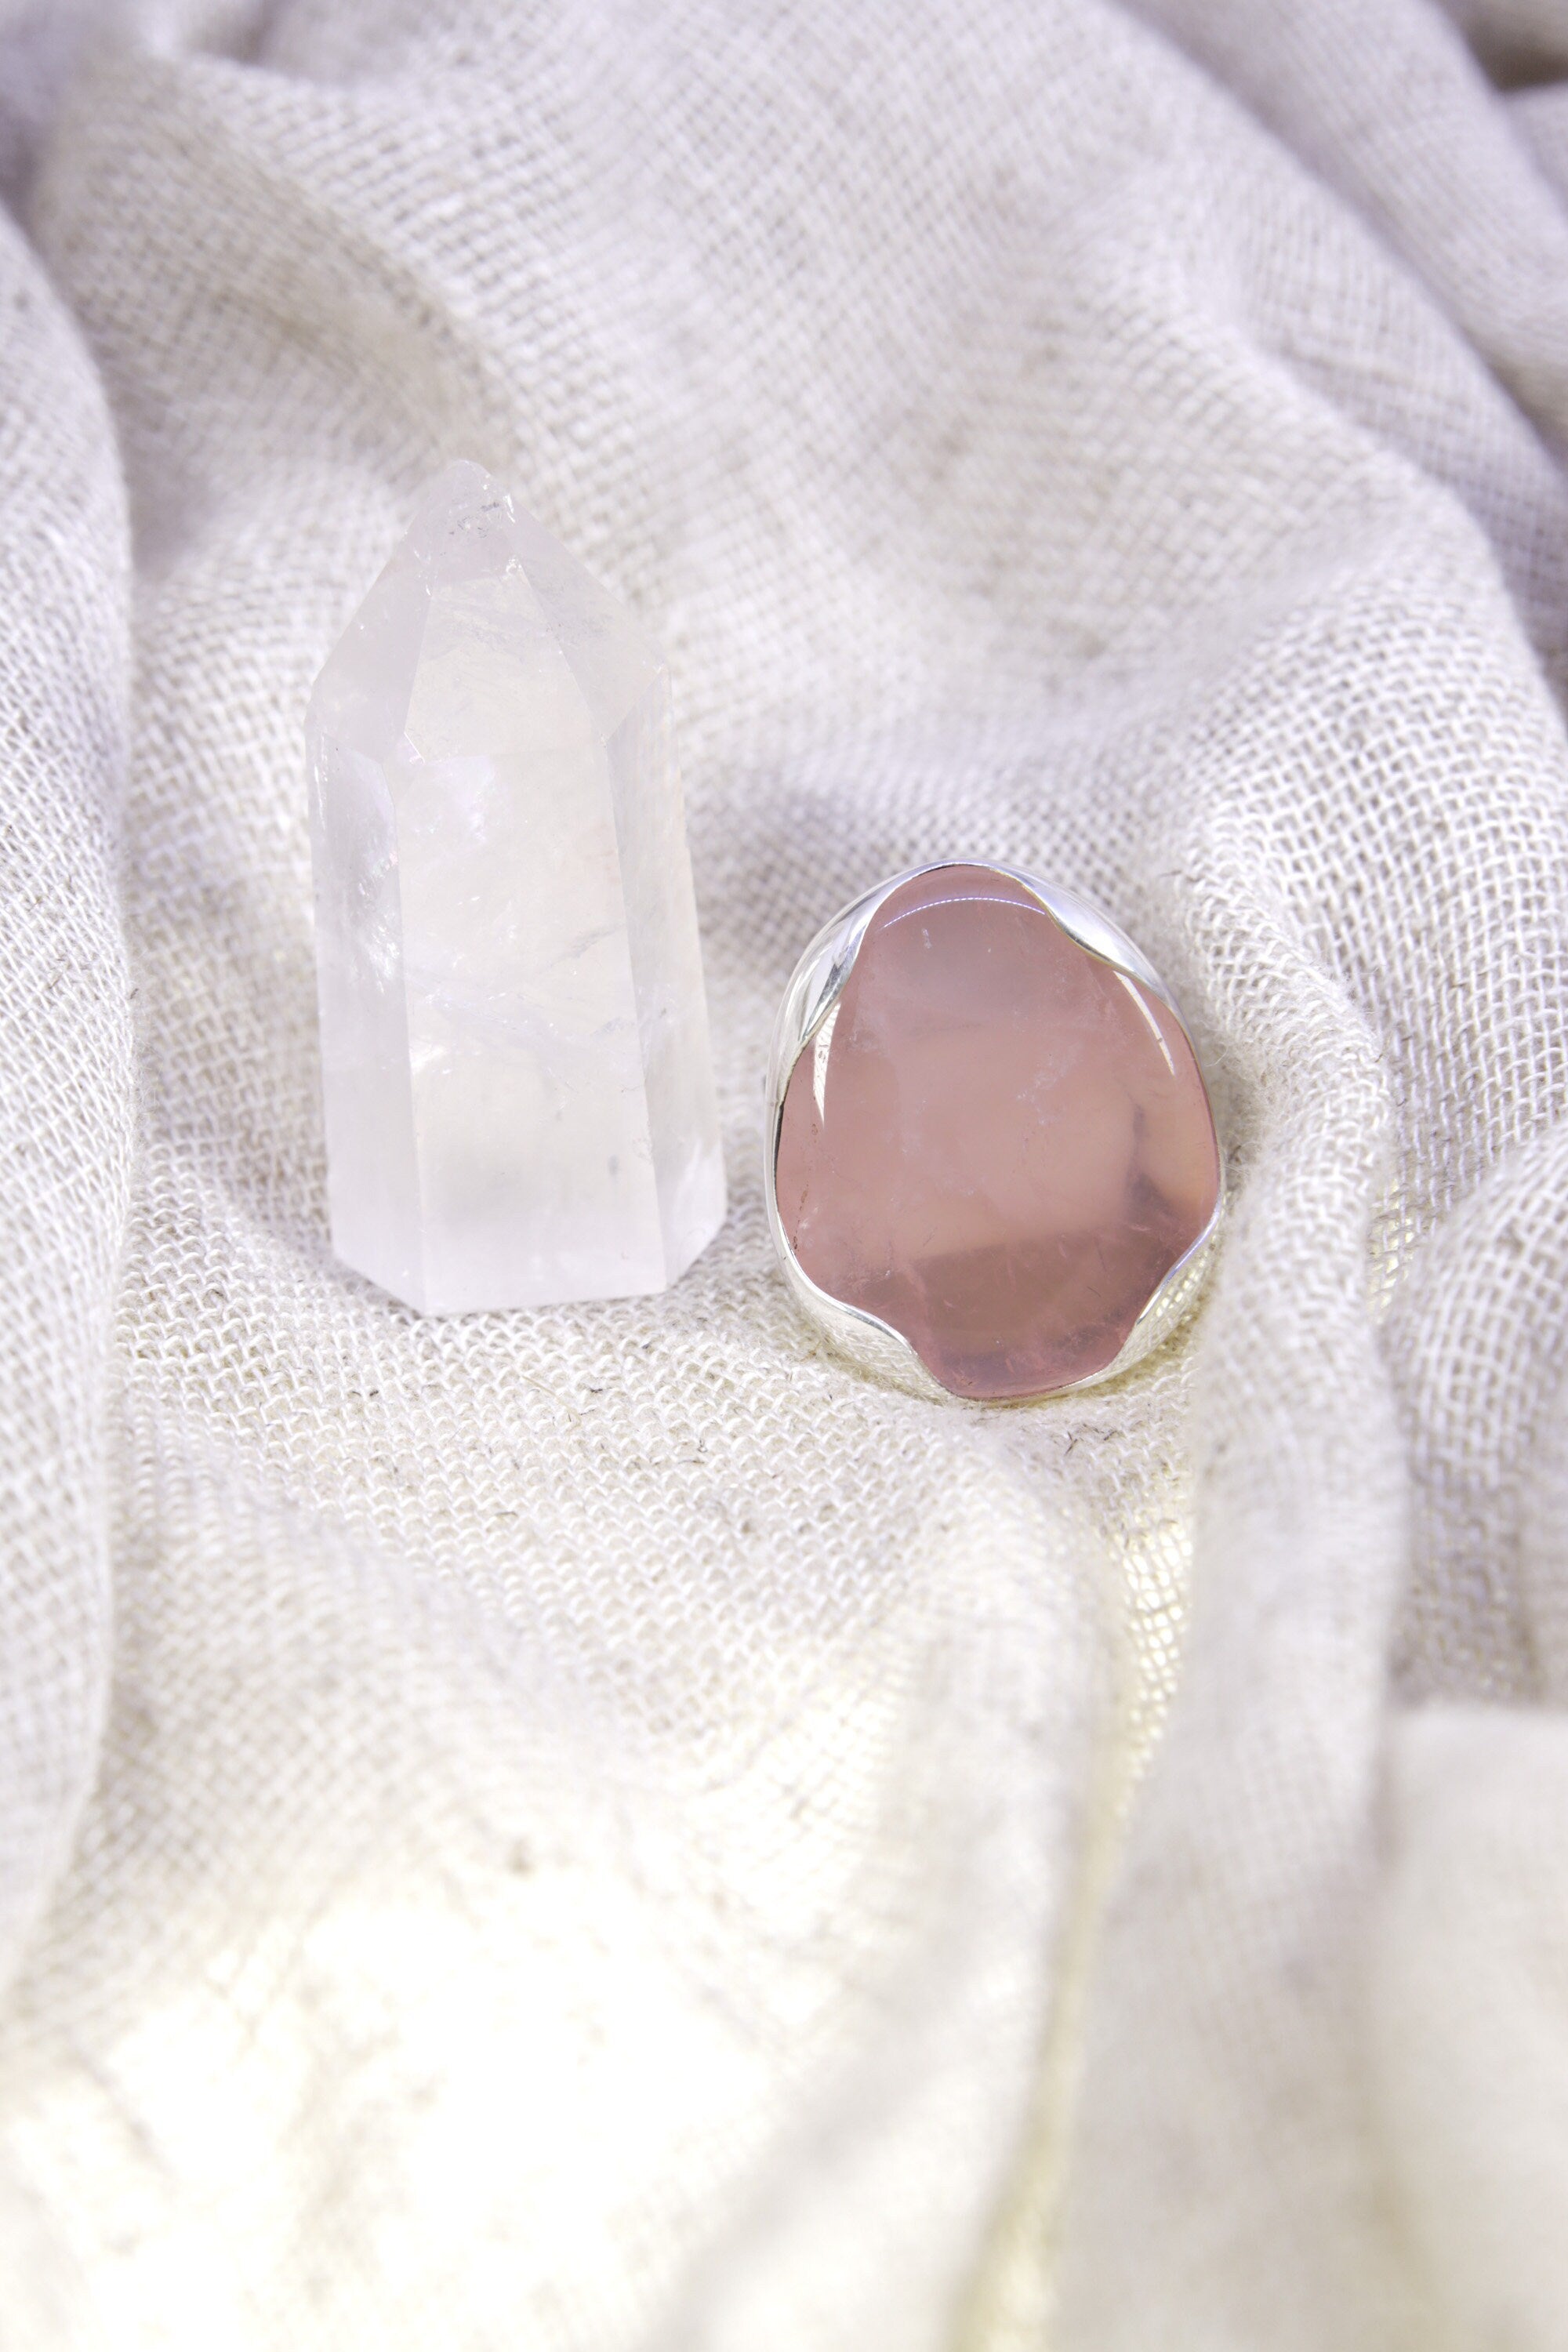 The Sturdy Haven of Gentle Affection: Adjustable Sterling Silver Ring with Oval Rose Quartz - Unisex - Size 5-12 US